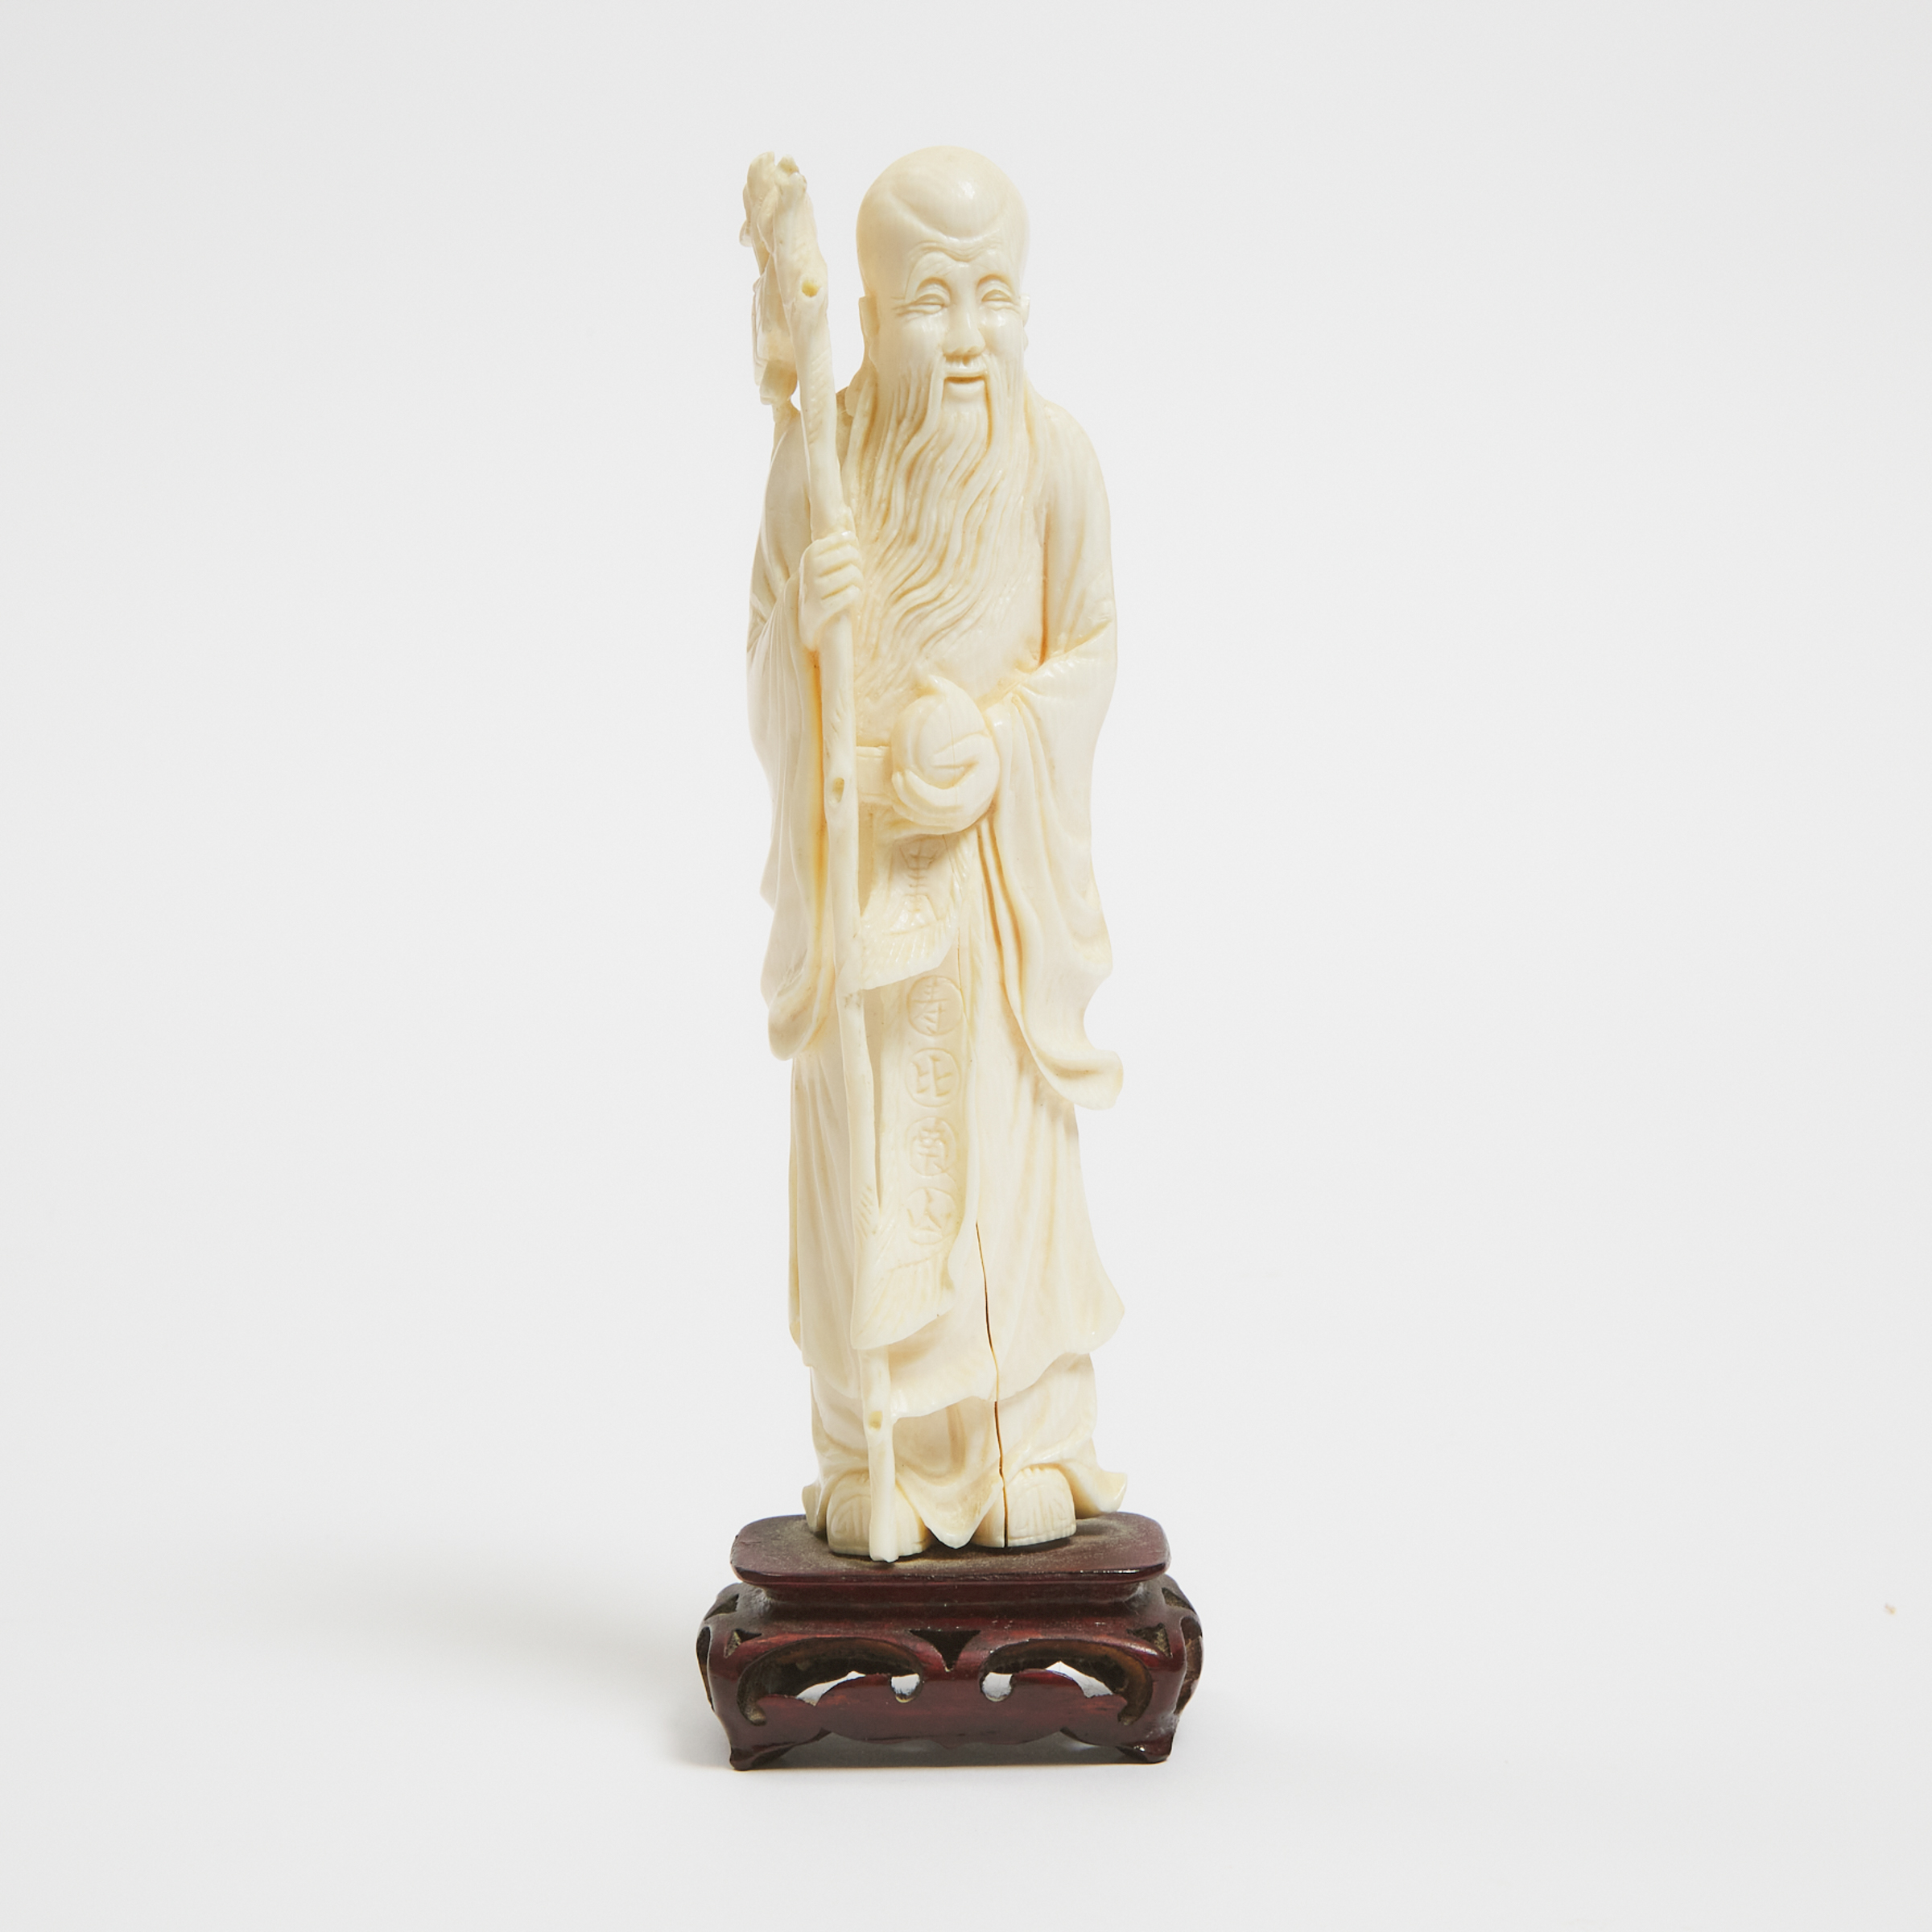 An Ivory Figure of a Shoulao, Late Qing/Republican Period, 19th/20th Century